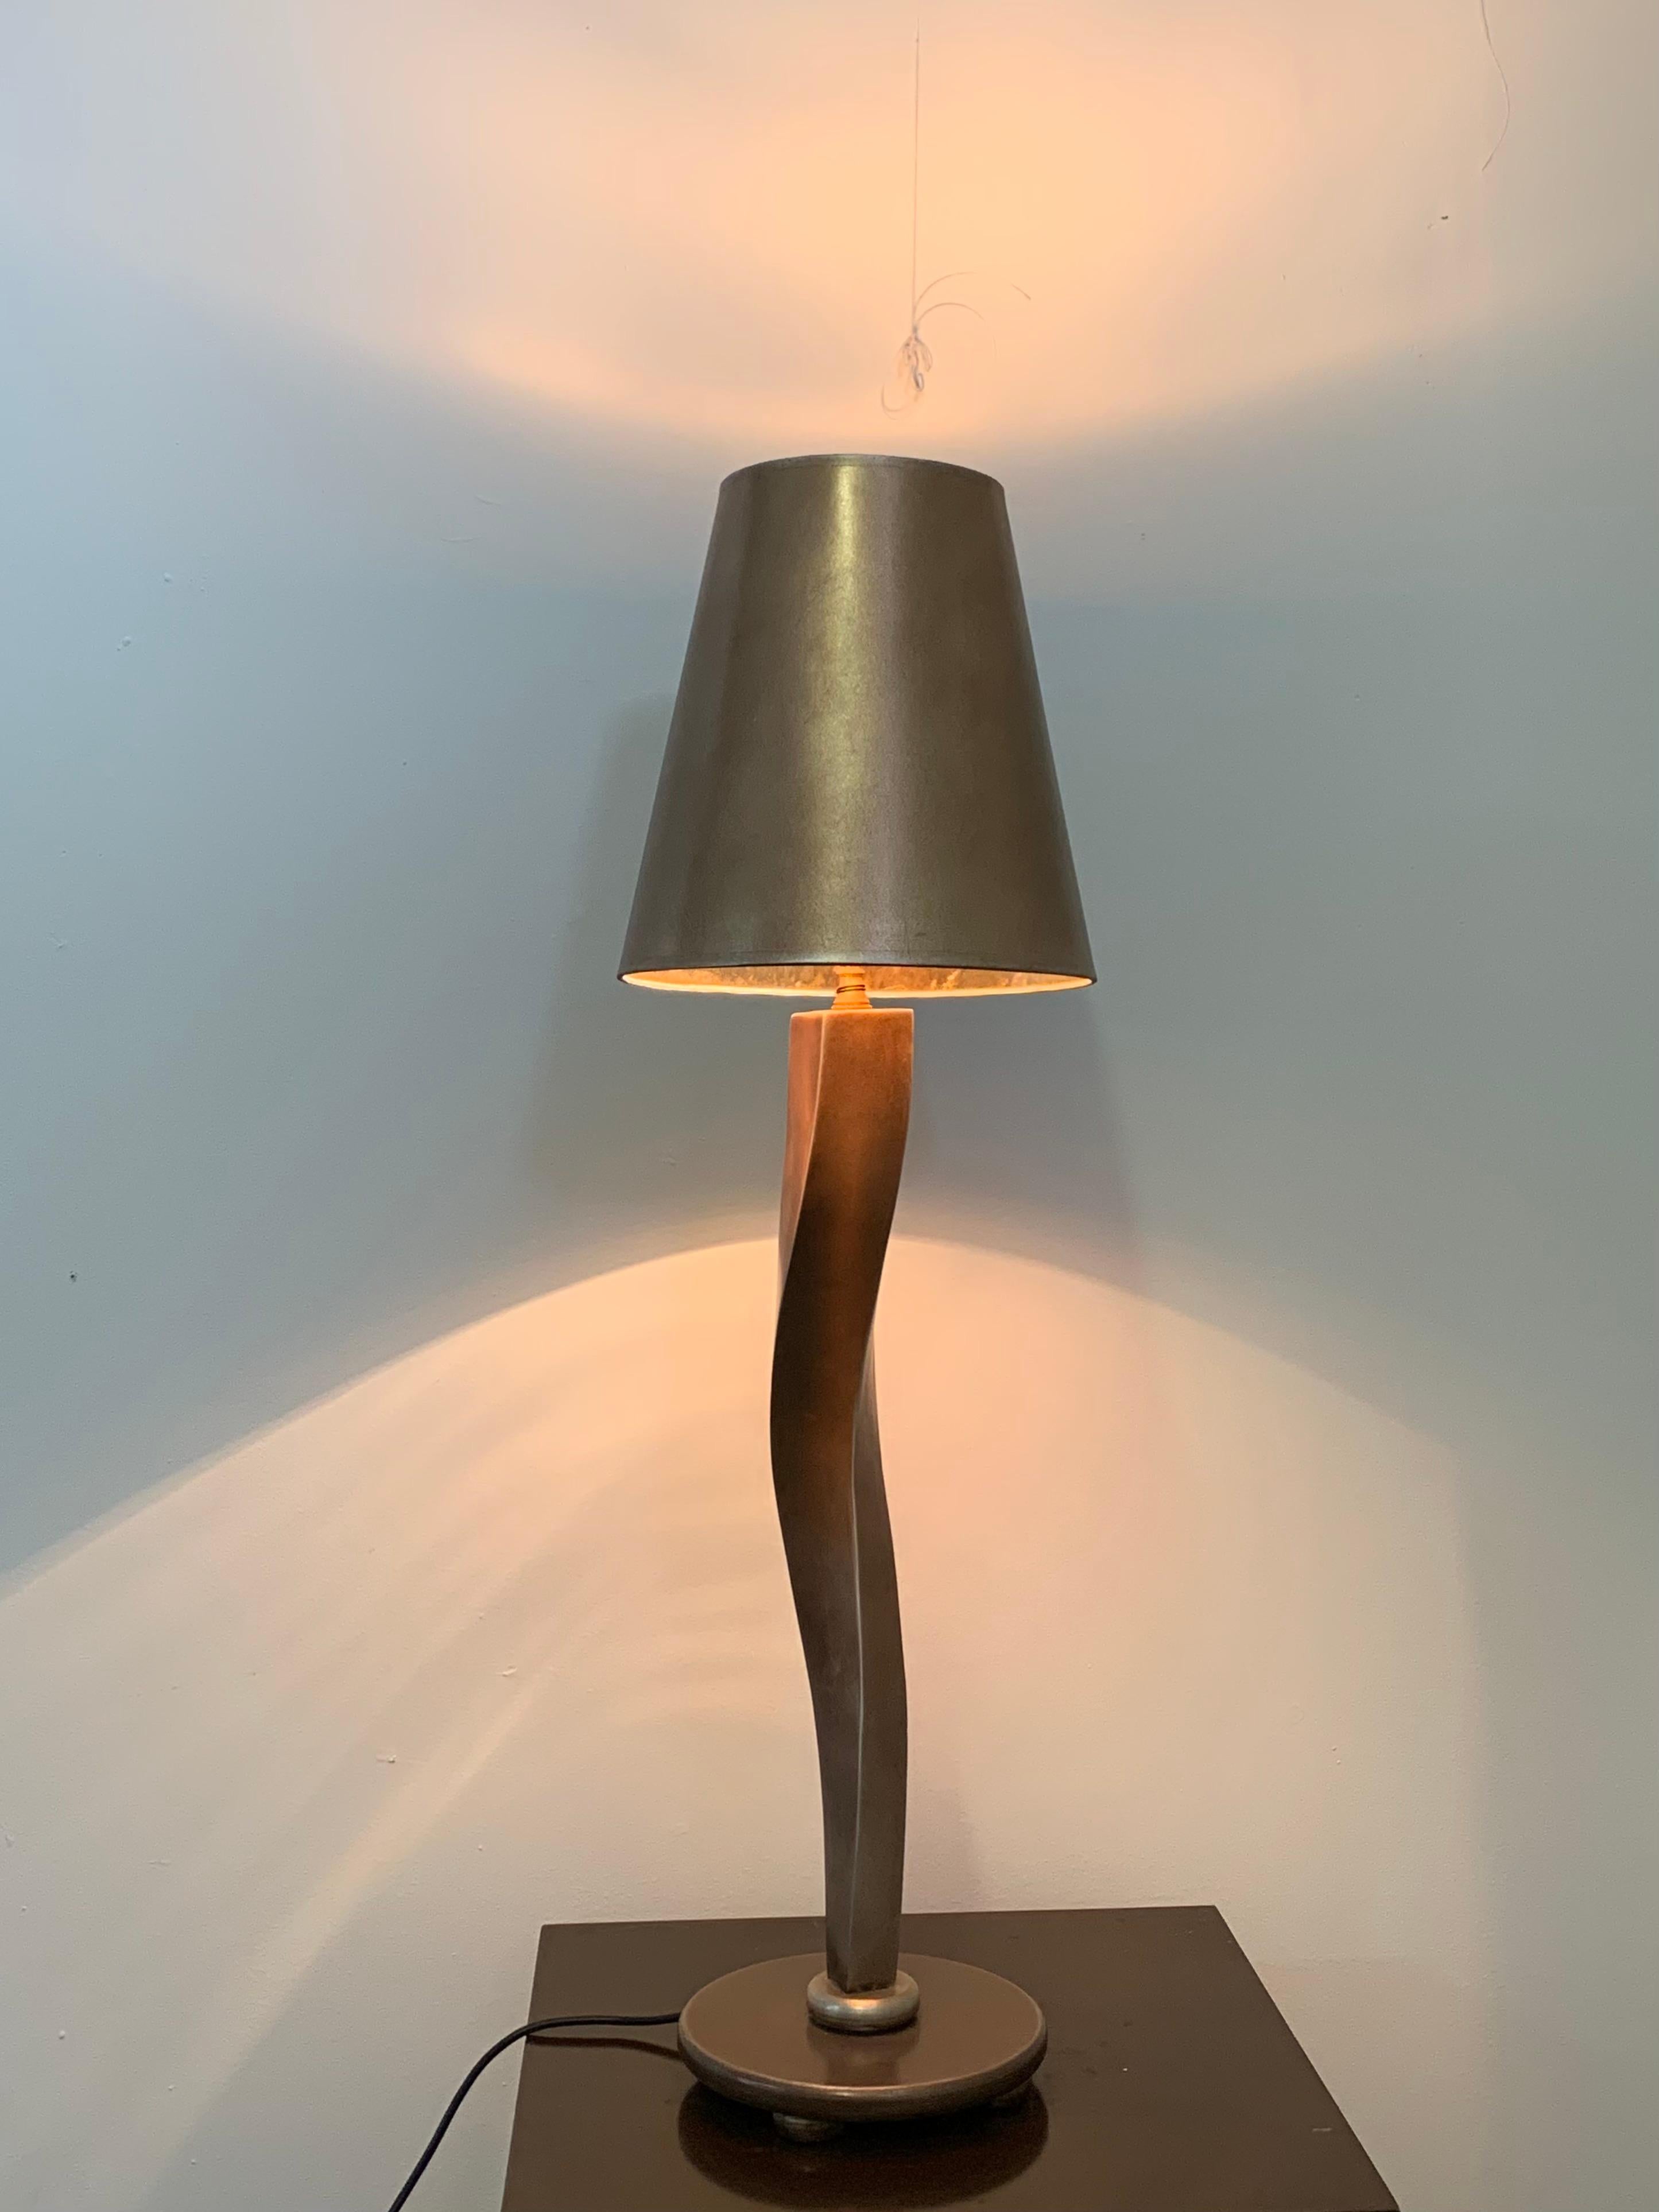 Lamp by Lam Lee Group/Leeazanne, 1990s. Sinuous gold leaf lamp beautifully patinated gilded bronze. European socket (up to 250V). 